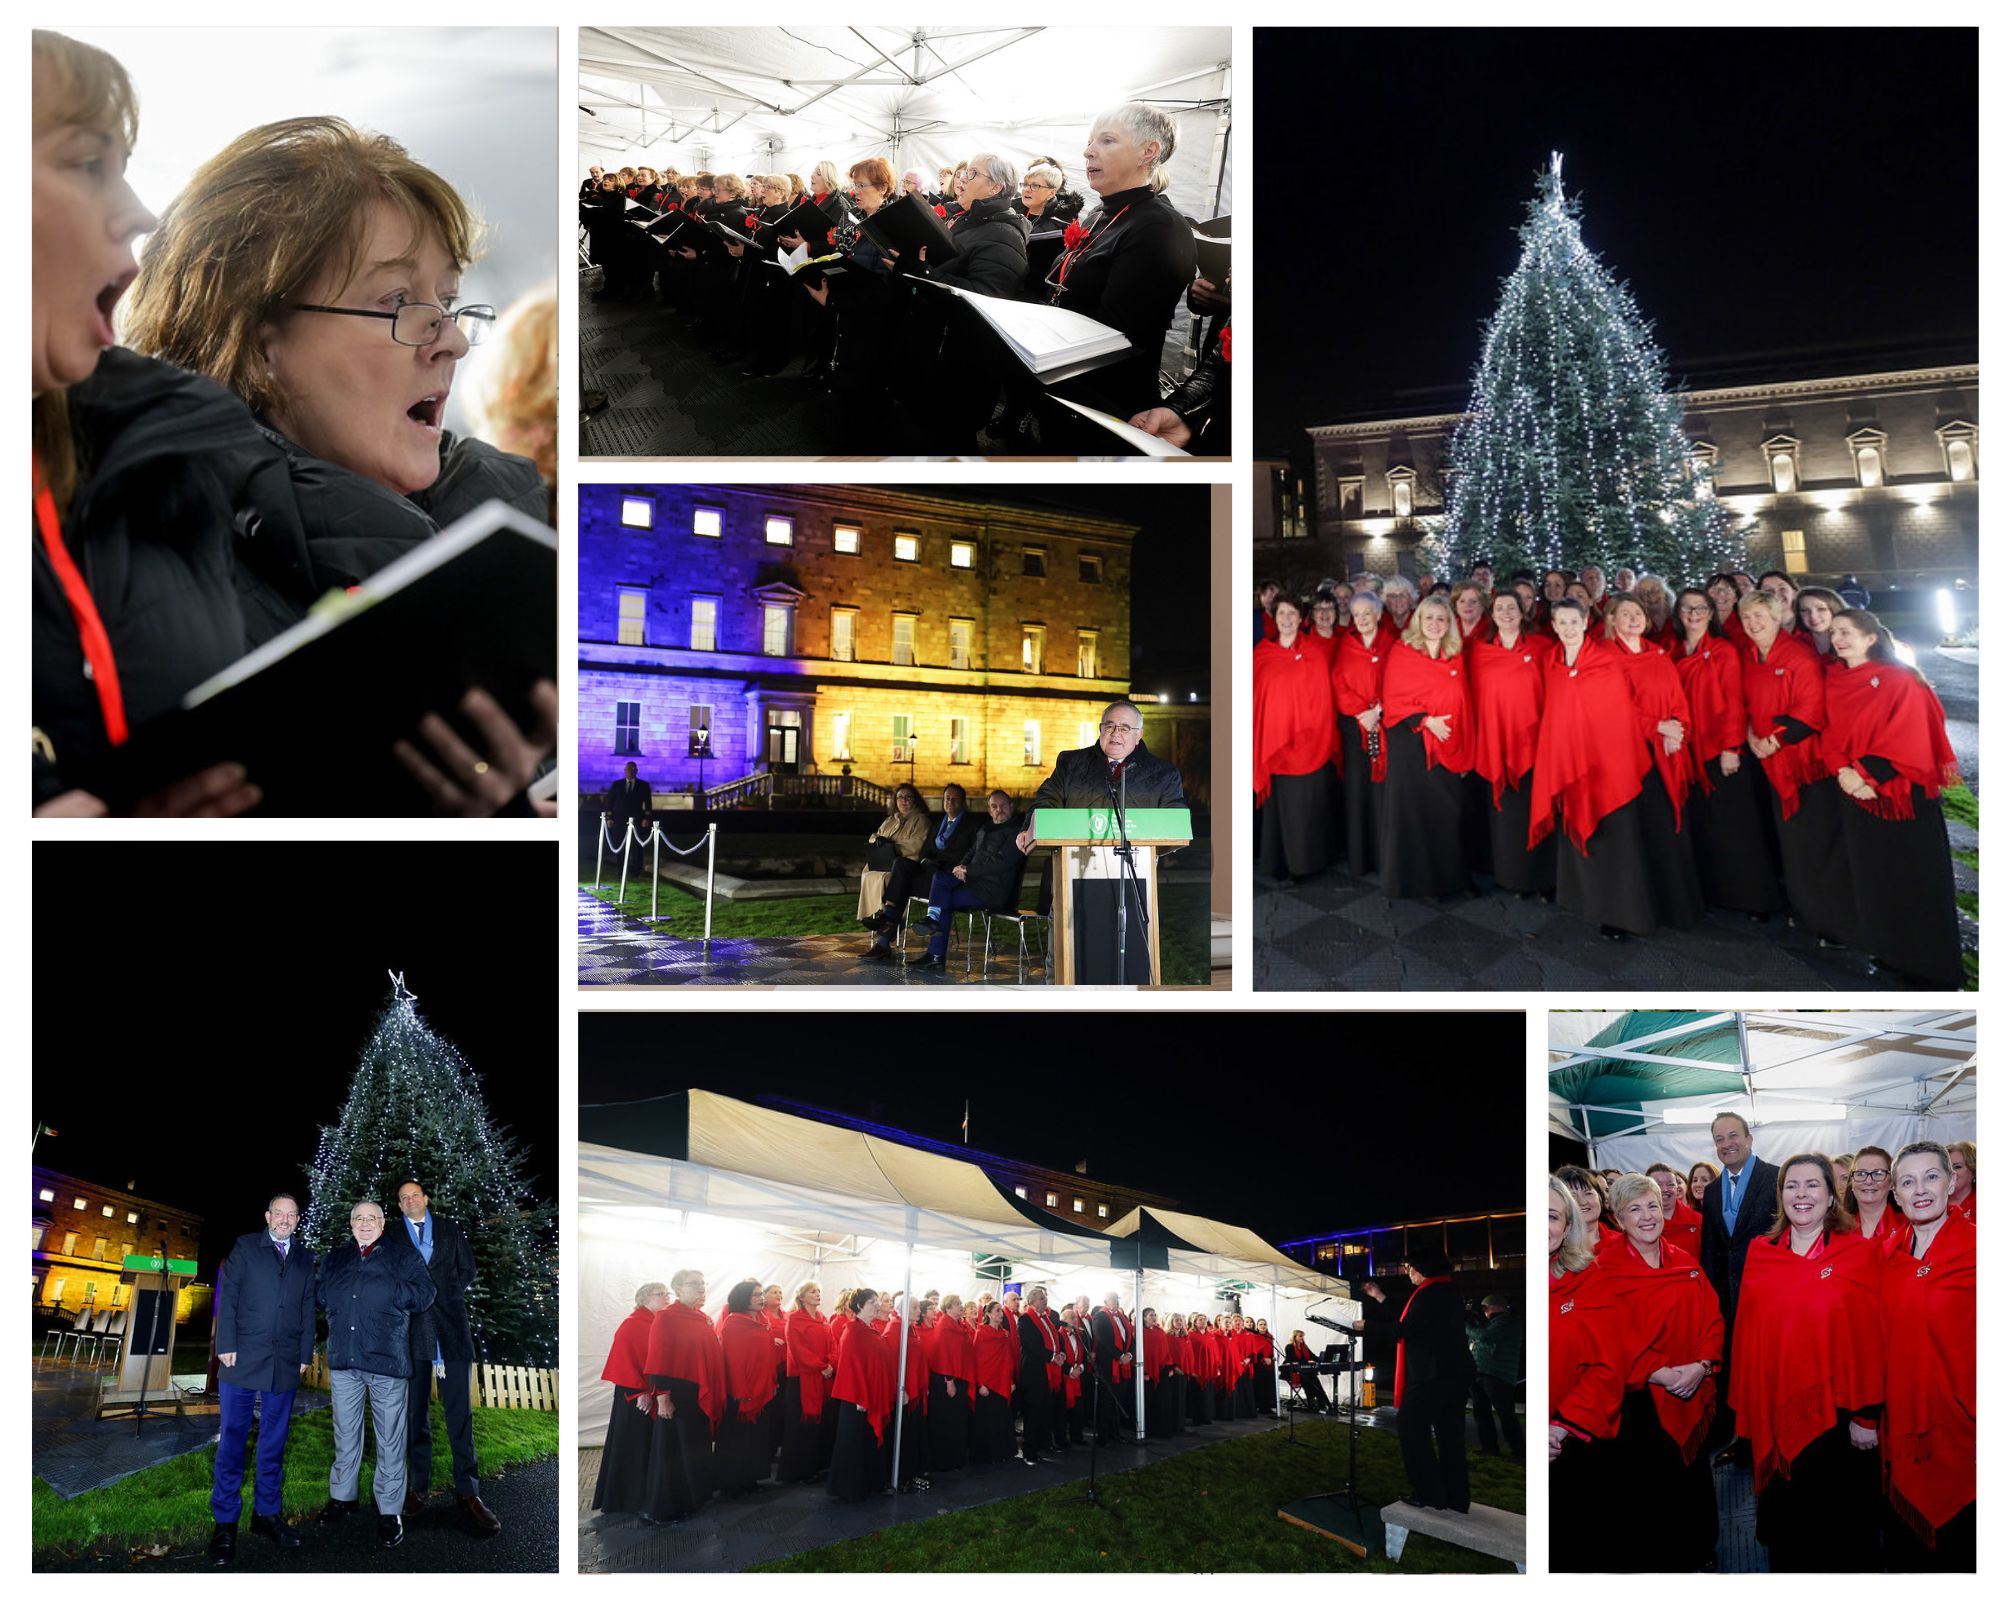 Collage of photos of the choirs and guests at the lighting of the Christmas tree on Leinster Lawn